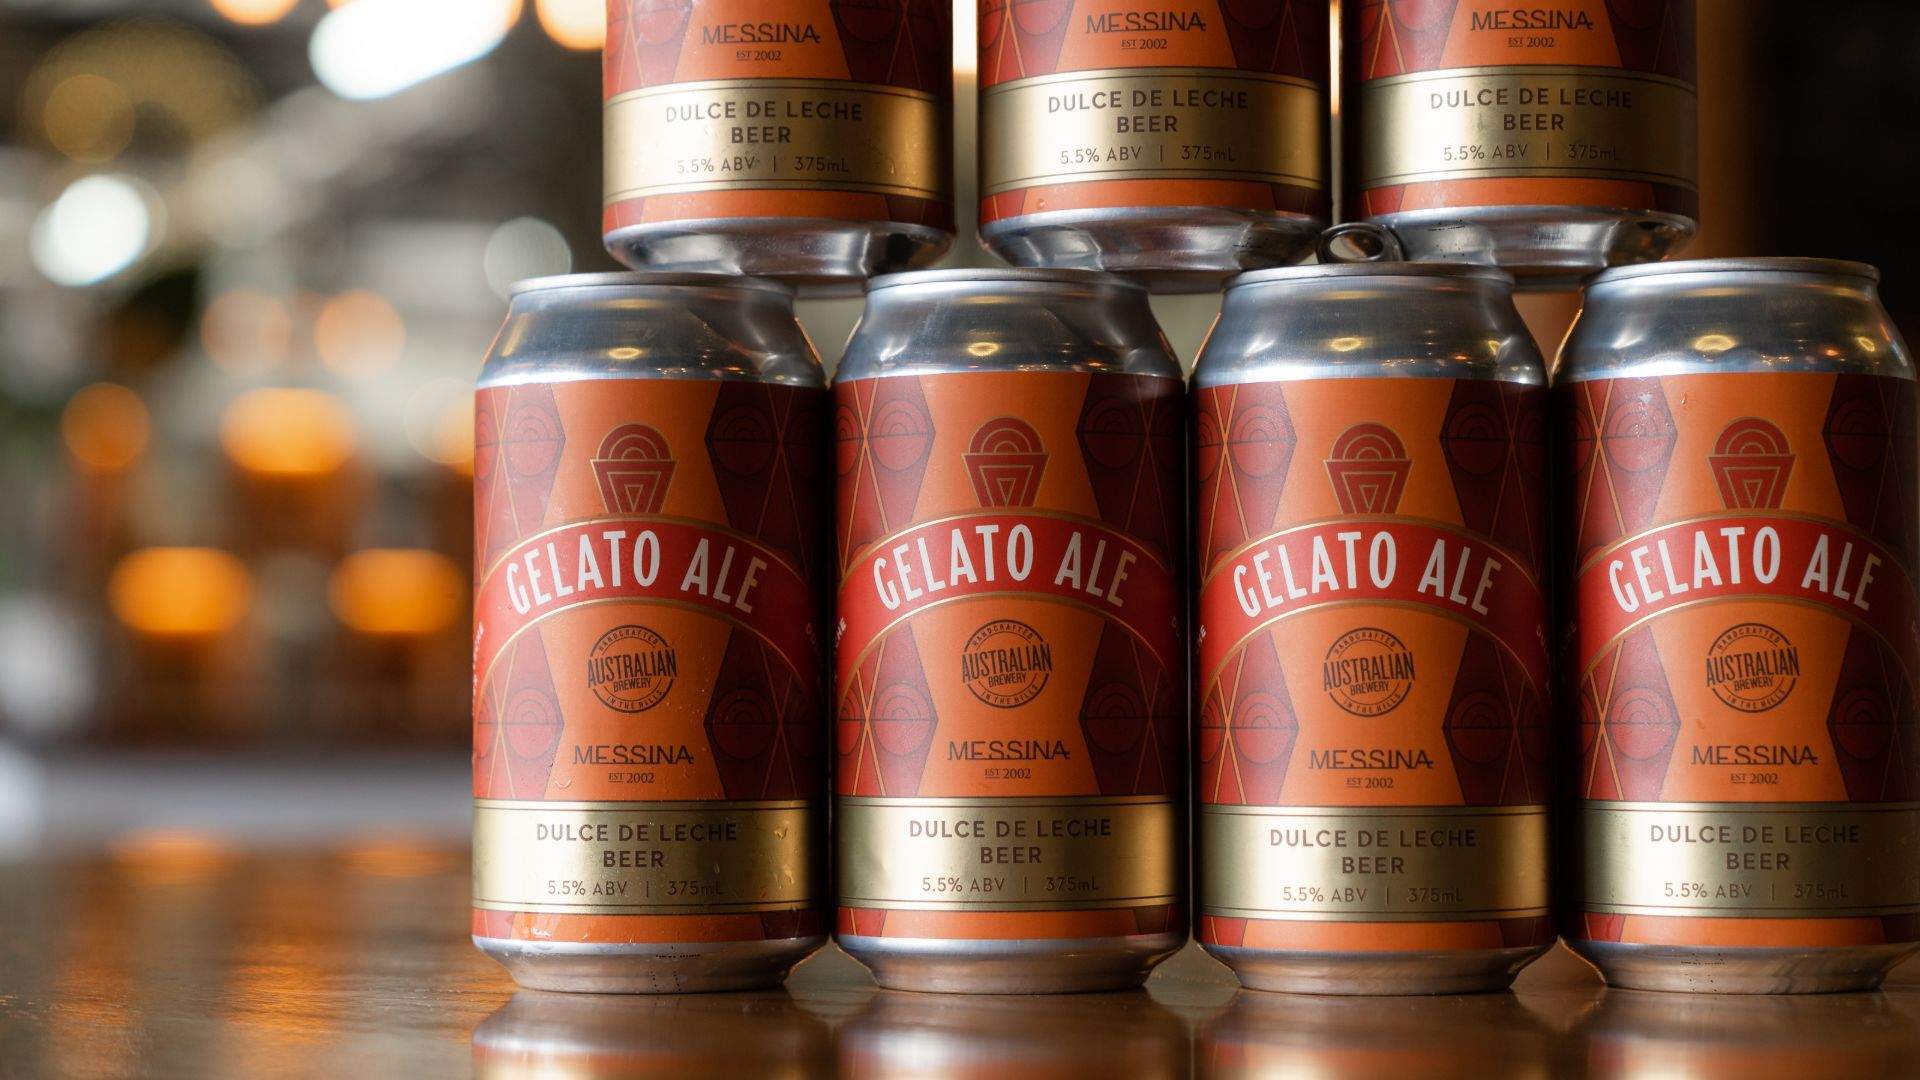 Gelato Messina Has Just Dropped a Limited-Edition Dulce de Leche Beer